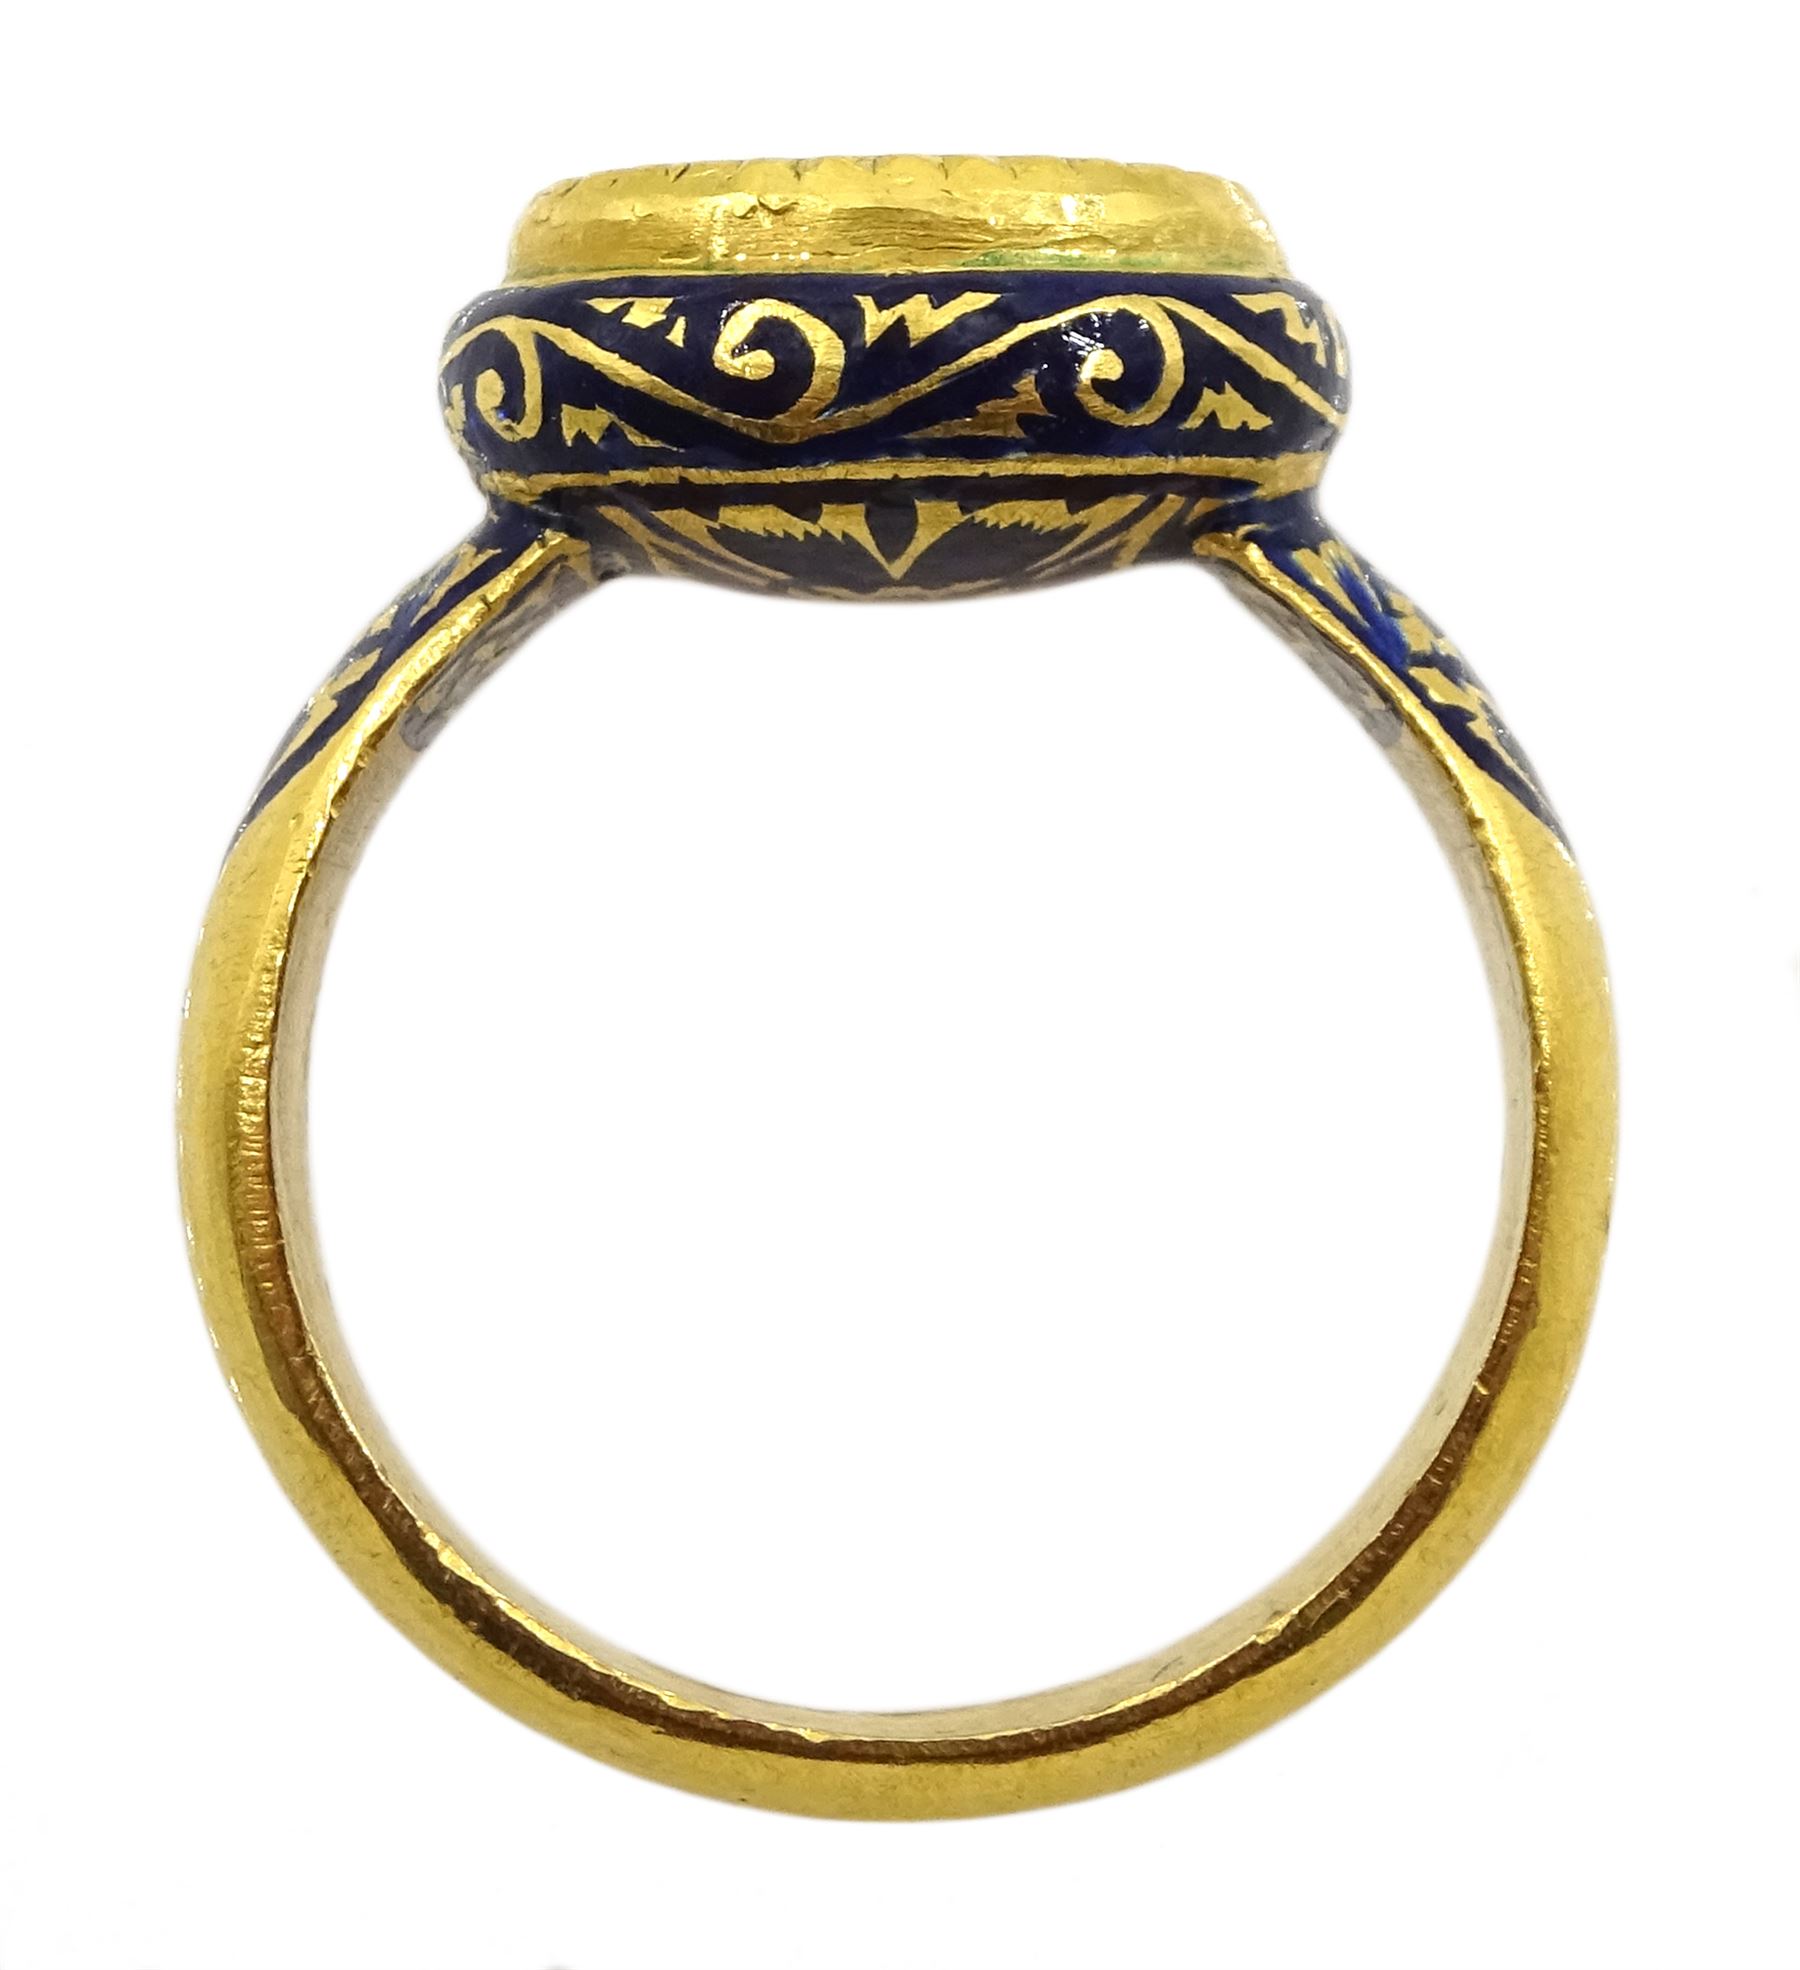 Late 19th/early 20th century gold Indian table cut diamond ring - Image 5 of 6